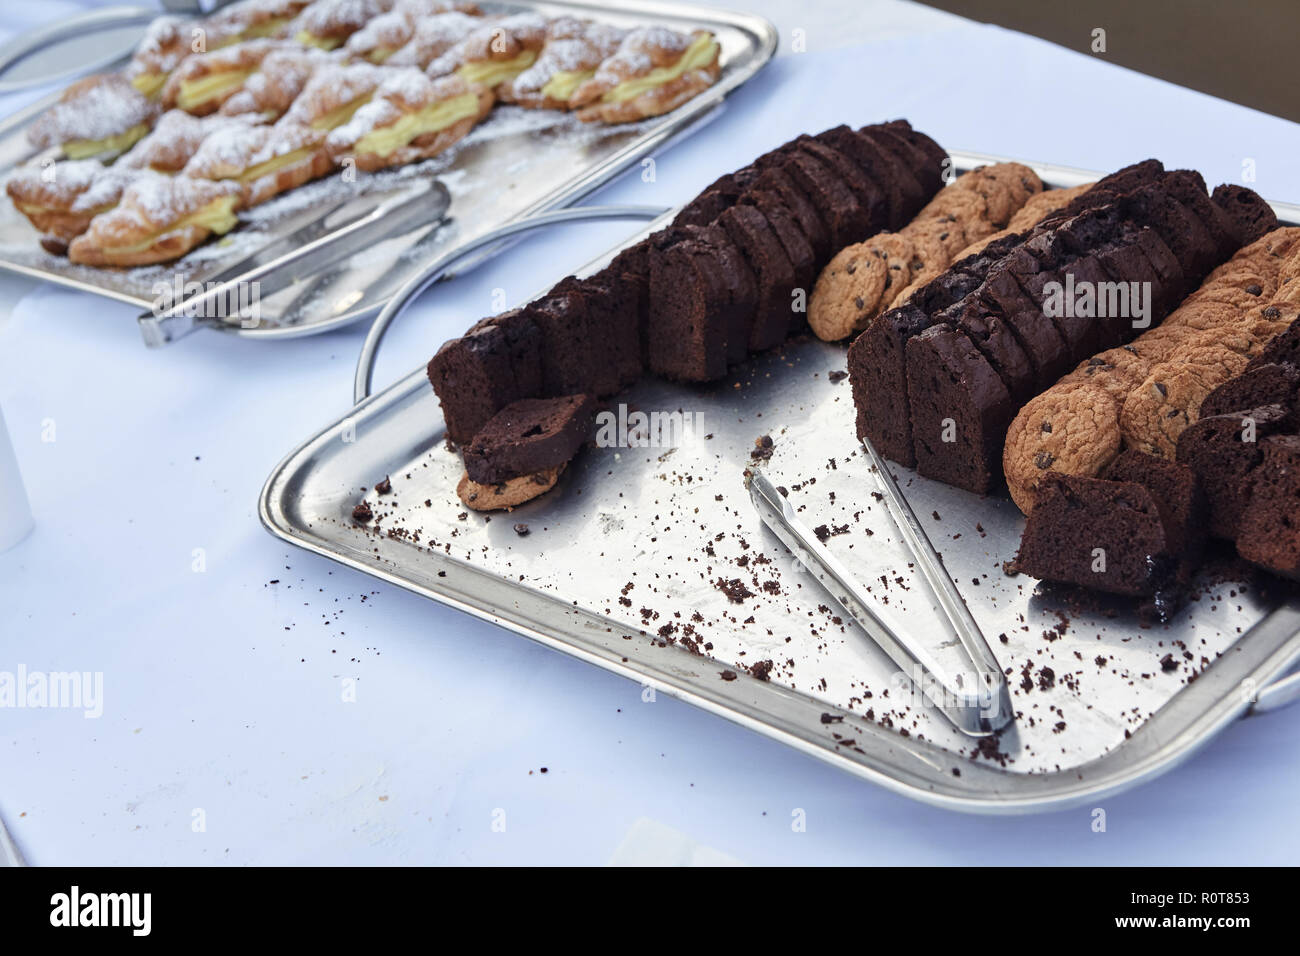 breakfast buffet at hotel.Food tray with chokolate cake and cookies. Stock Photo